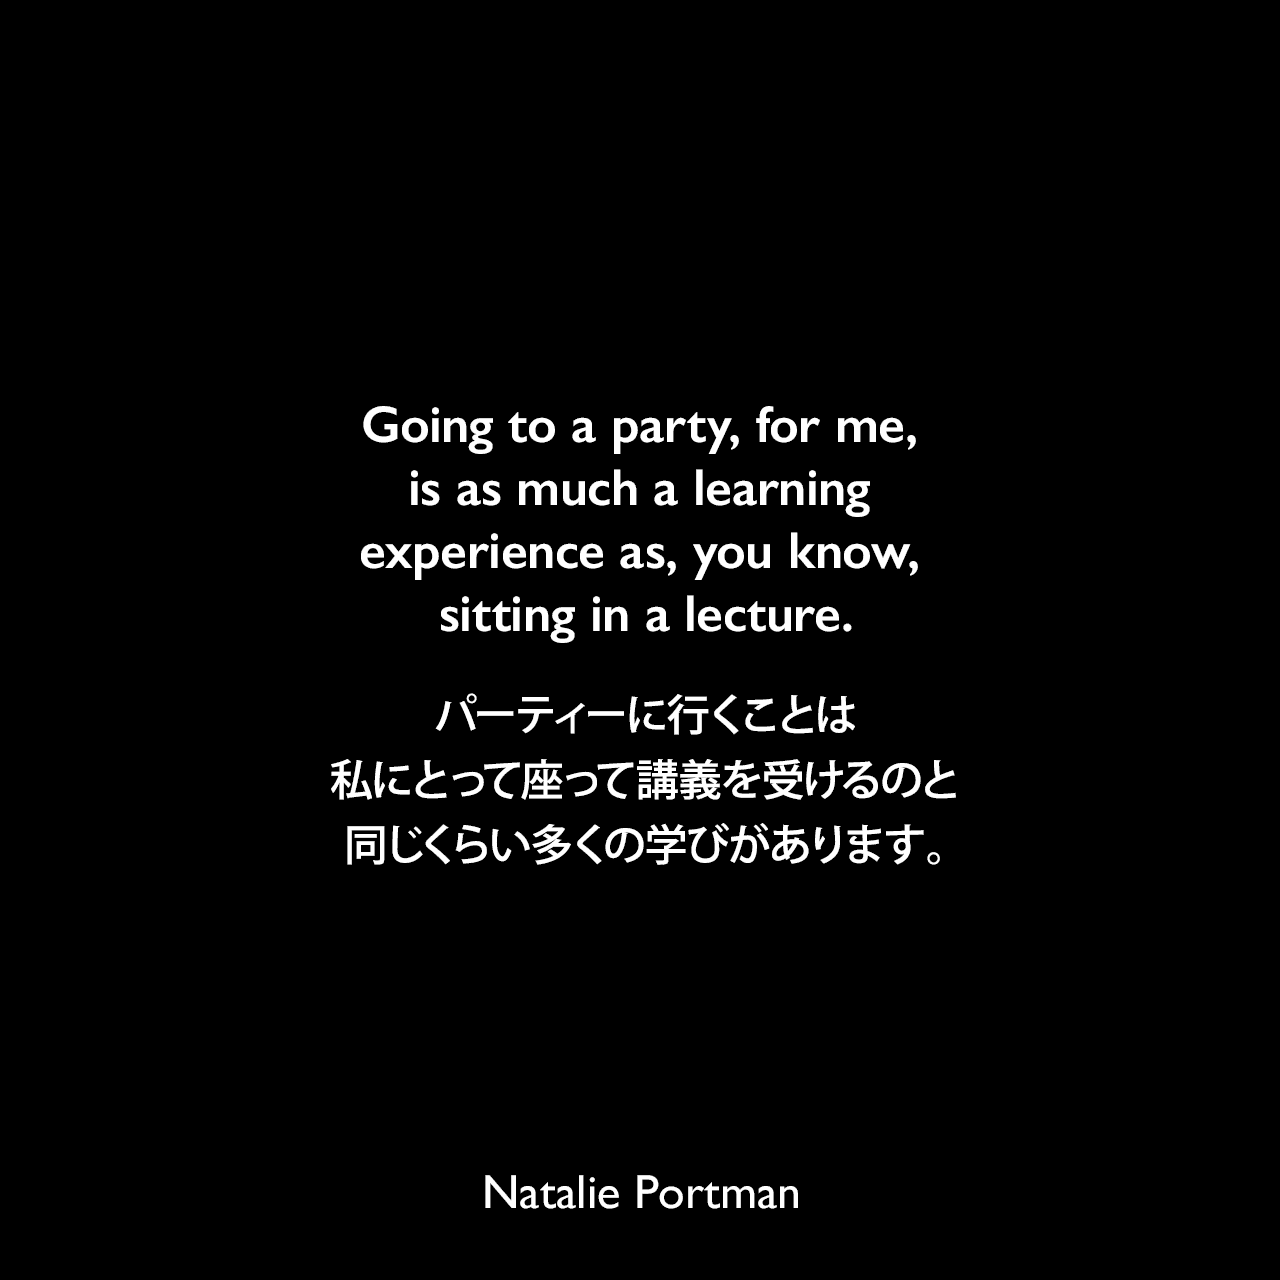 Going to a party, for me, is as much a learning experience as, you know, sitting in a lecture.パーティーに行くことは、私にとって座って講義を受けるのと同じくらい多くの学びがあります。Natalie Portman